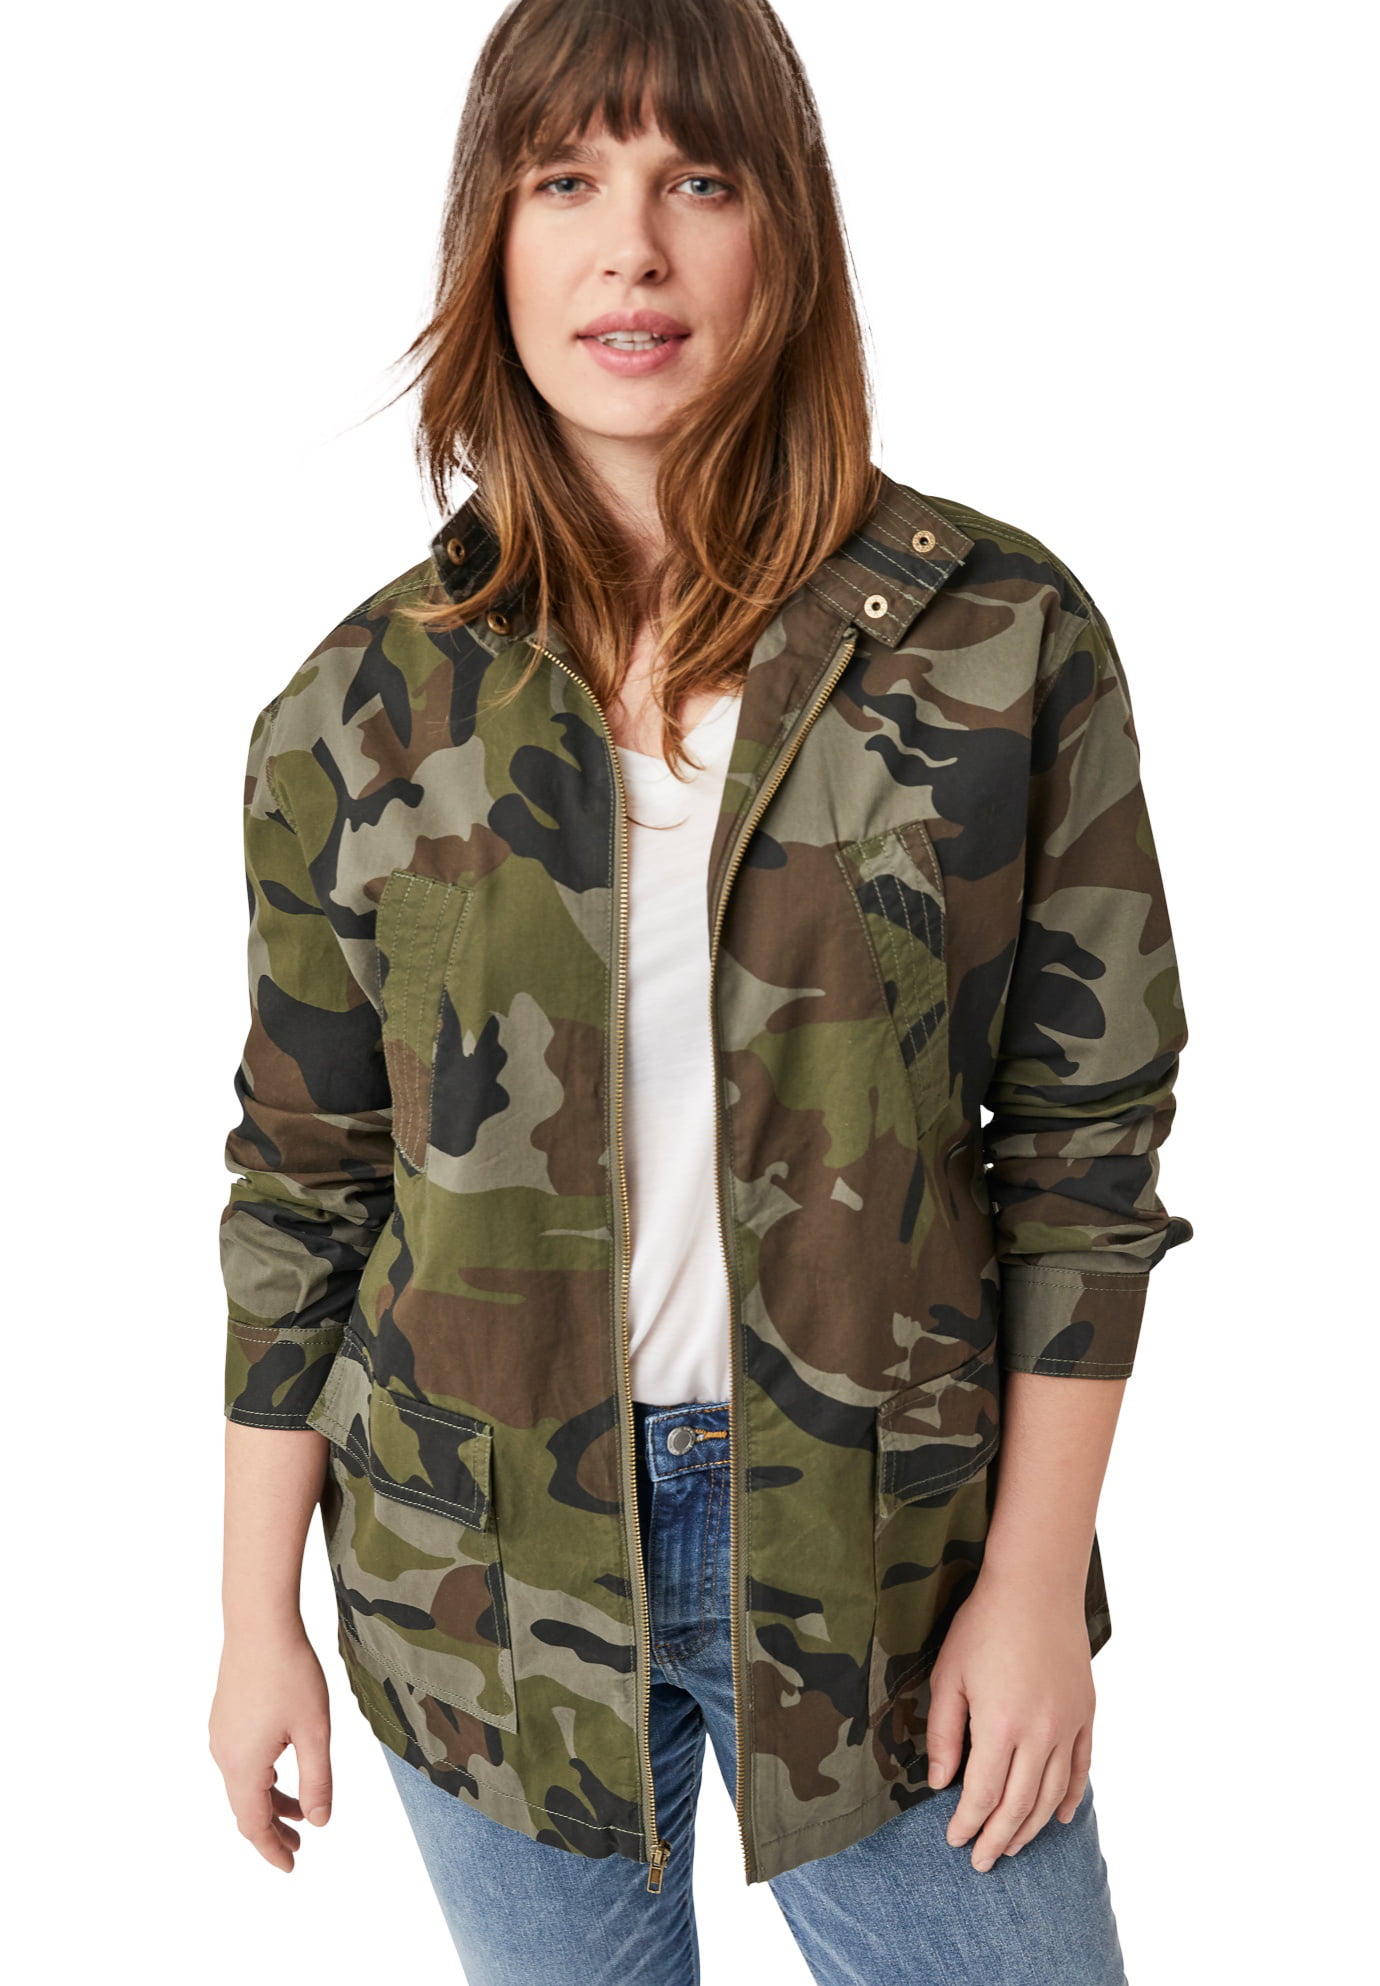 Ellos Women's Camo Utility Jacket Lightweight With Pockets, 60% OFF